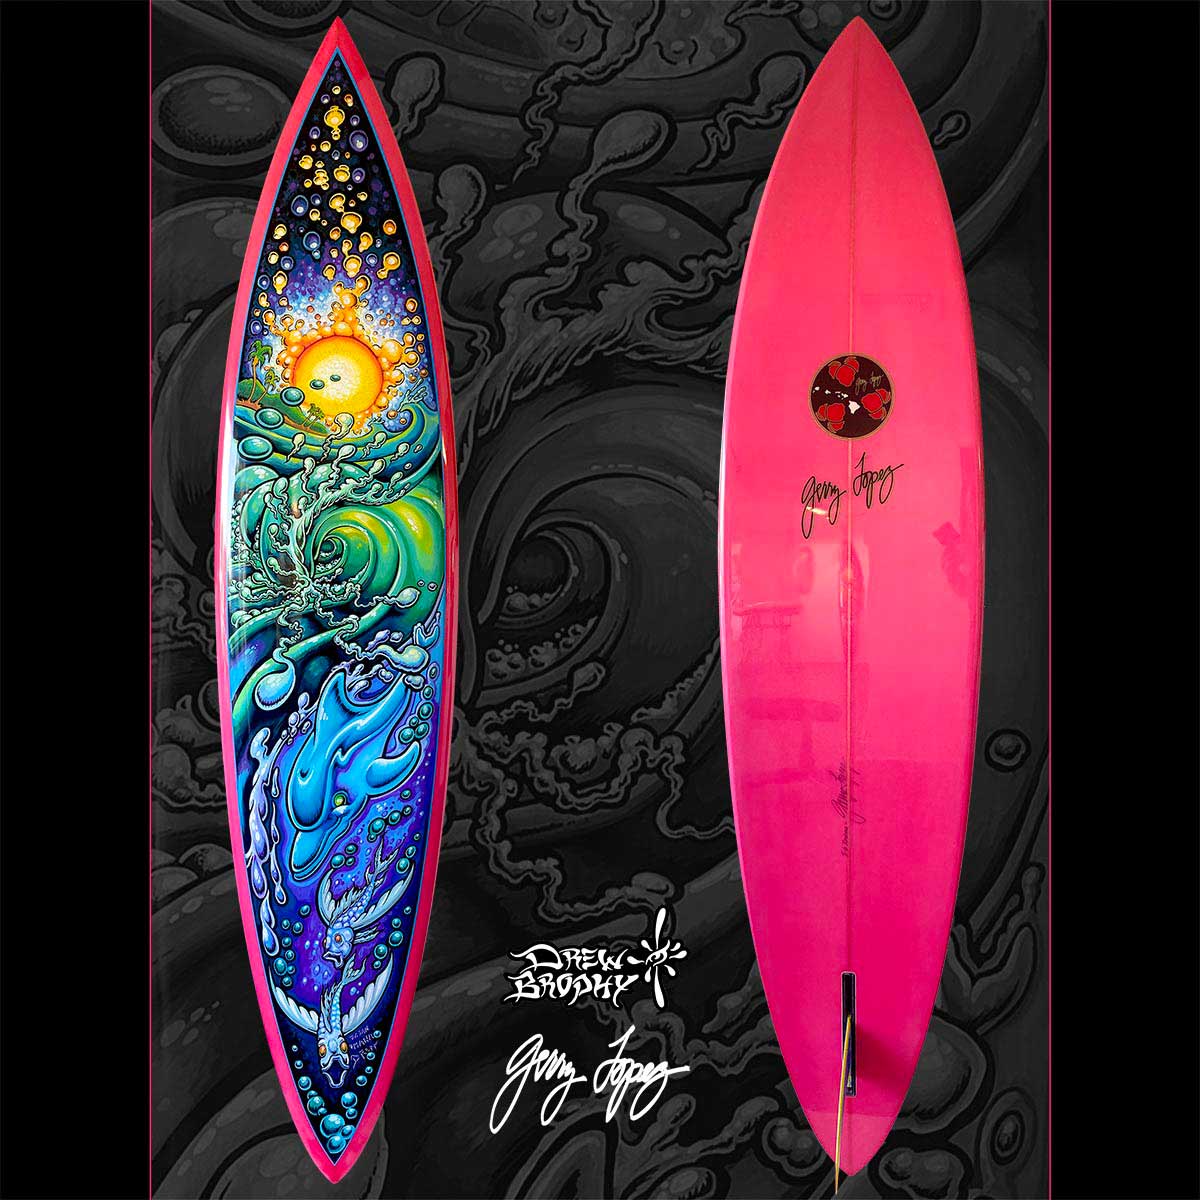 SOLD! Ocean Ohana Fine Art Surfboard - Hand Shaped by Gerry Lopez & Hand Painted by Drew Brophy